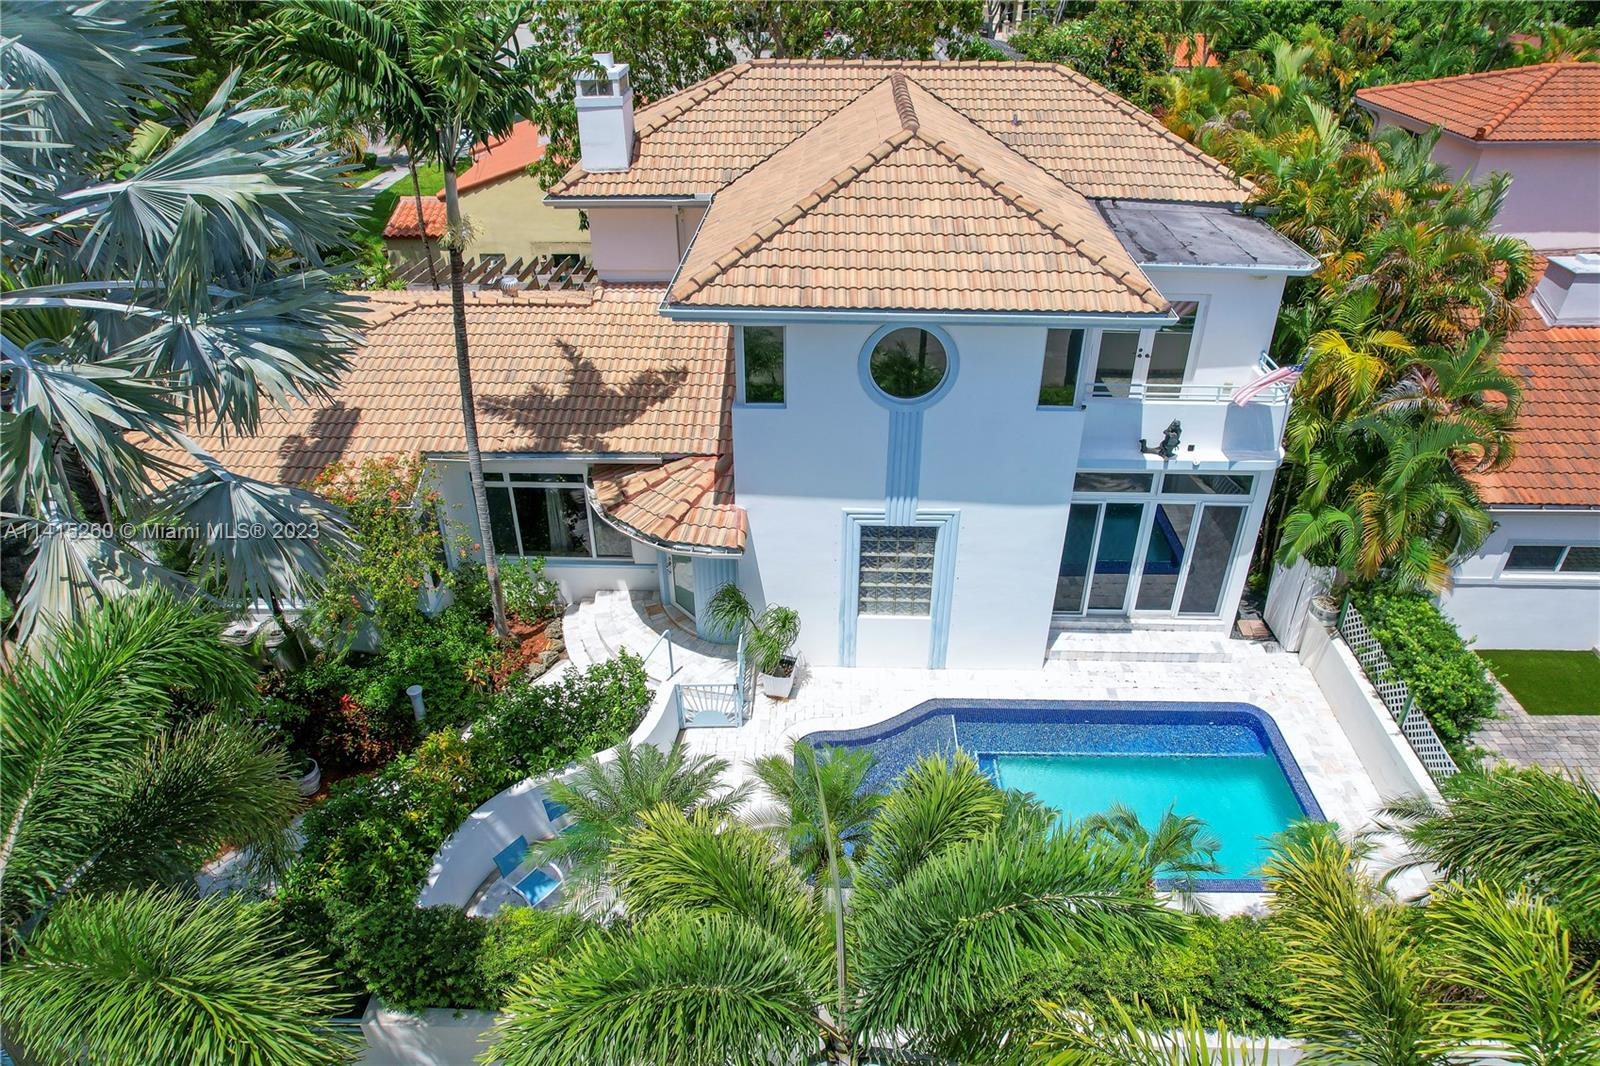 PRIME LOCATION!!!  Exquisite, one-of-a-kind Art Deco Style two story home with heated pool in “The Roads” it’s less than a mile from Brickell central, about 4 min drive to I95 & 10 min drive to coral gables. Family oriented neighborhood, with NO HOA and no restrictions.  Adjusted area 2,892 SQF